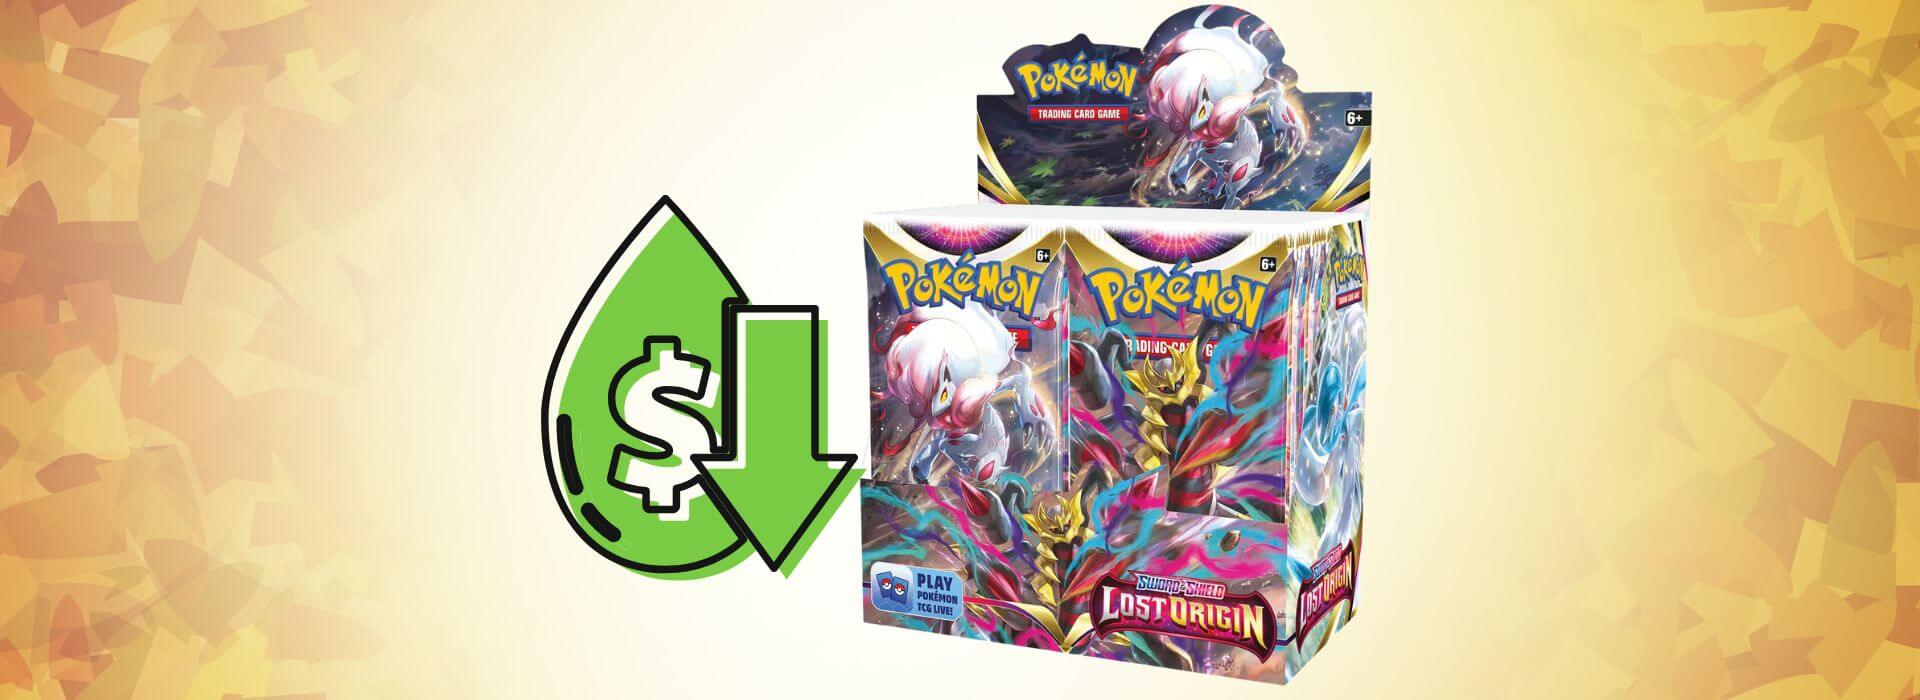 Cheap Pokémon Booster Boxes to Pickup Right Now in 2022/2023